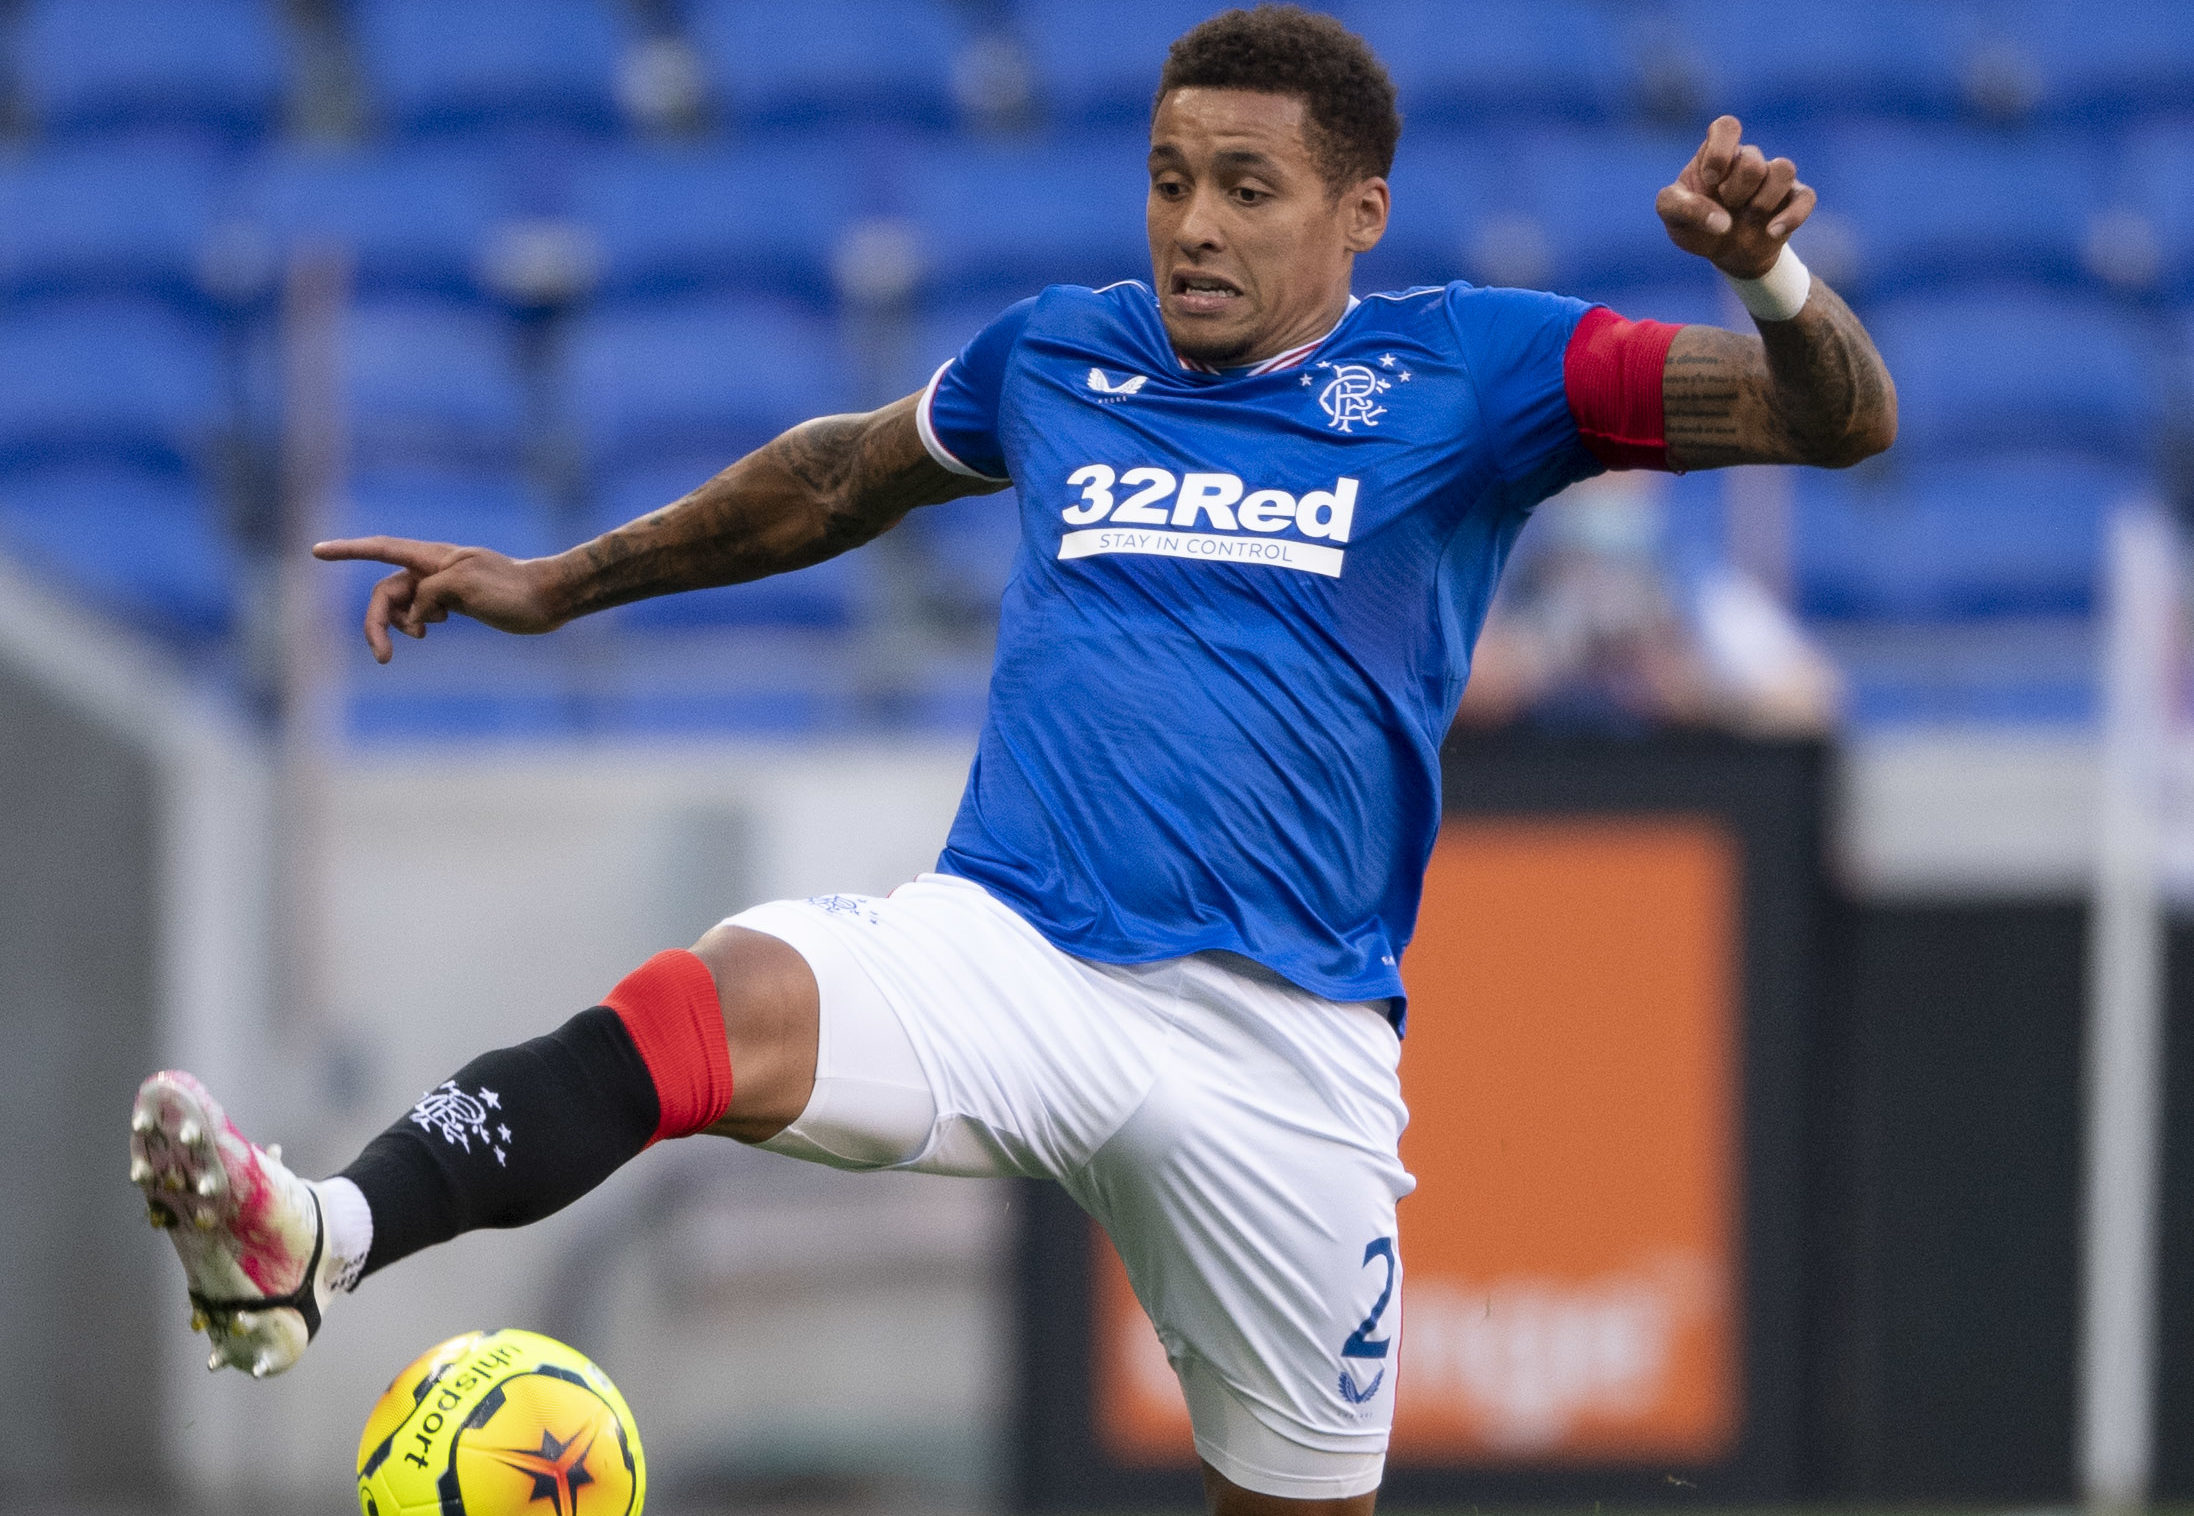 James Tavernier was forced off in the first leg due to a foot injury